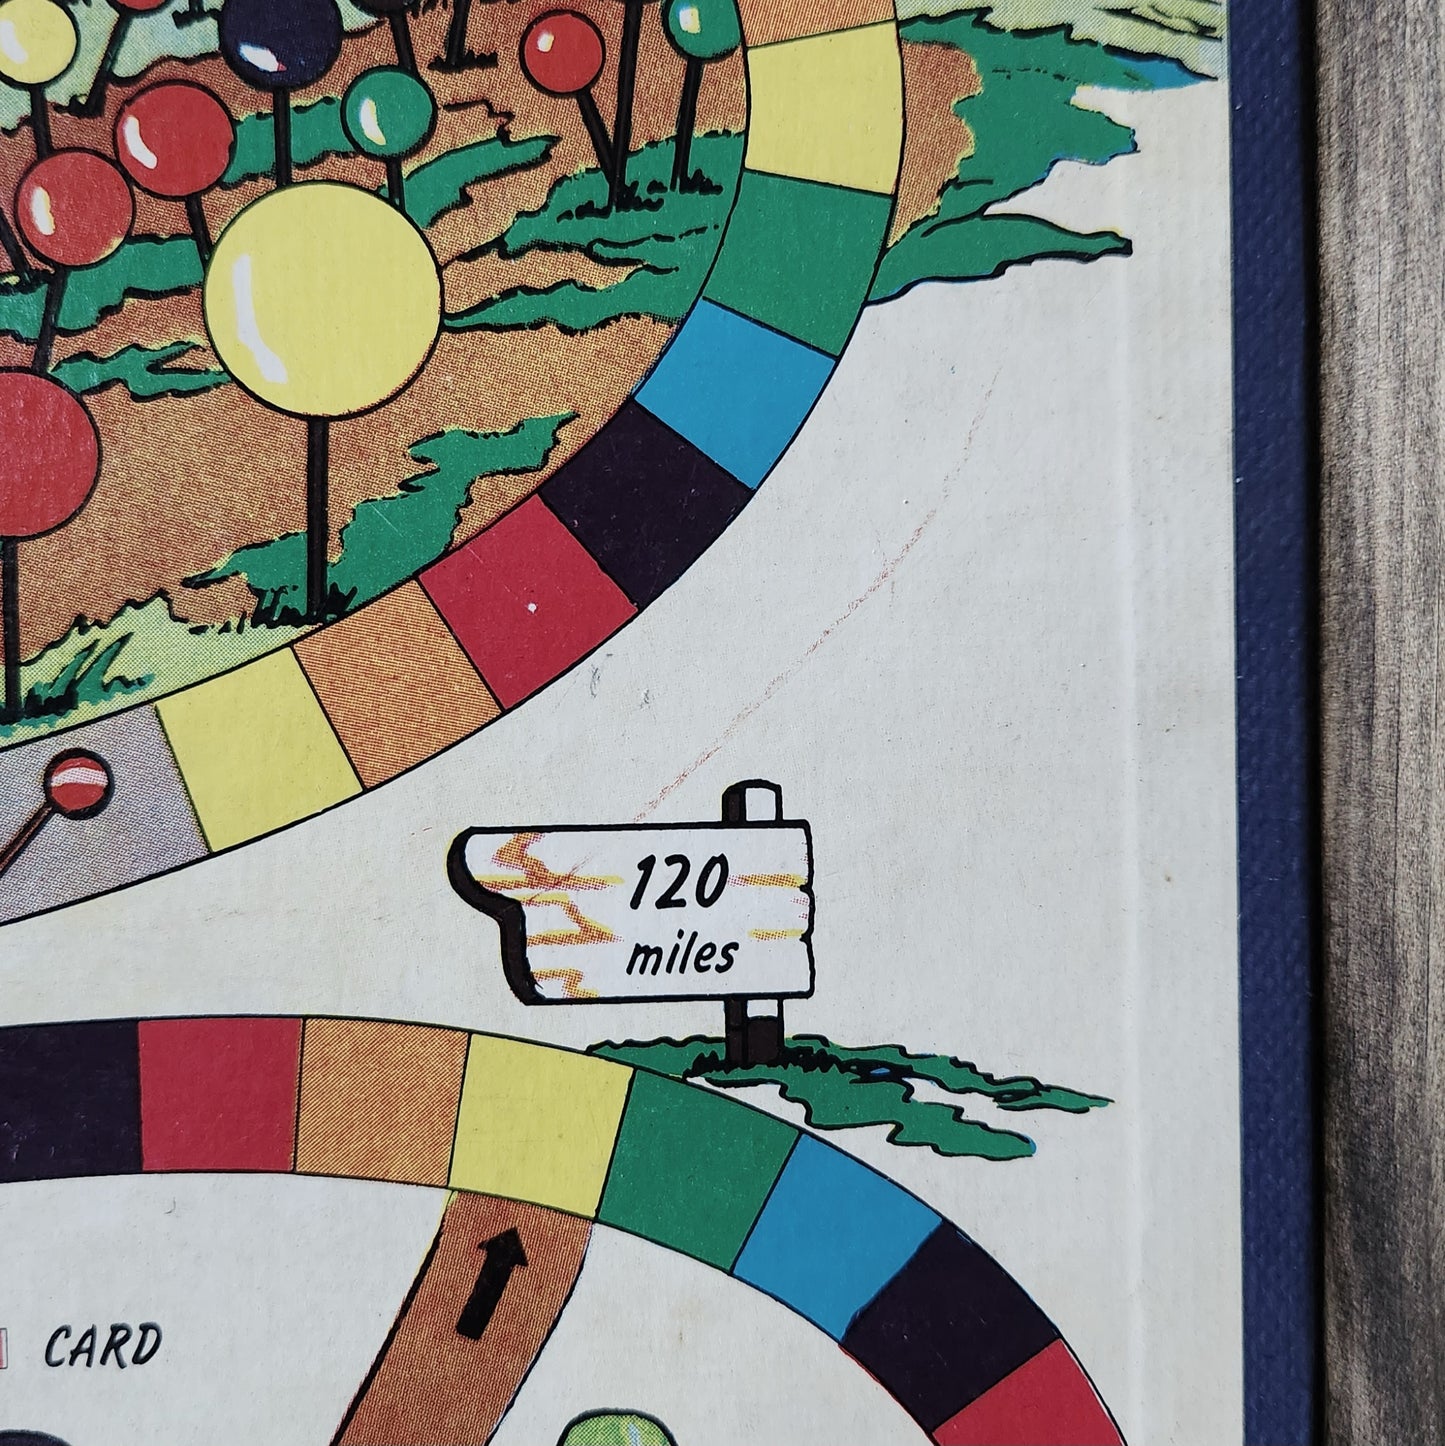 Display and Play 1949 Rare Original Candy Land Framed Board Game